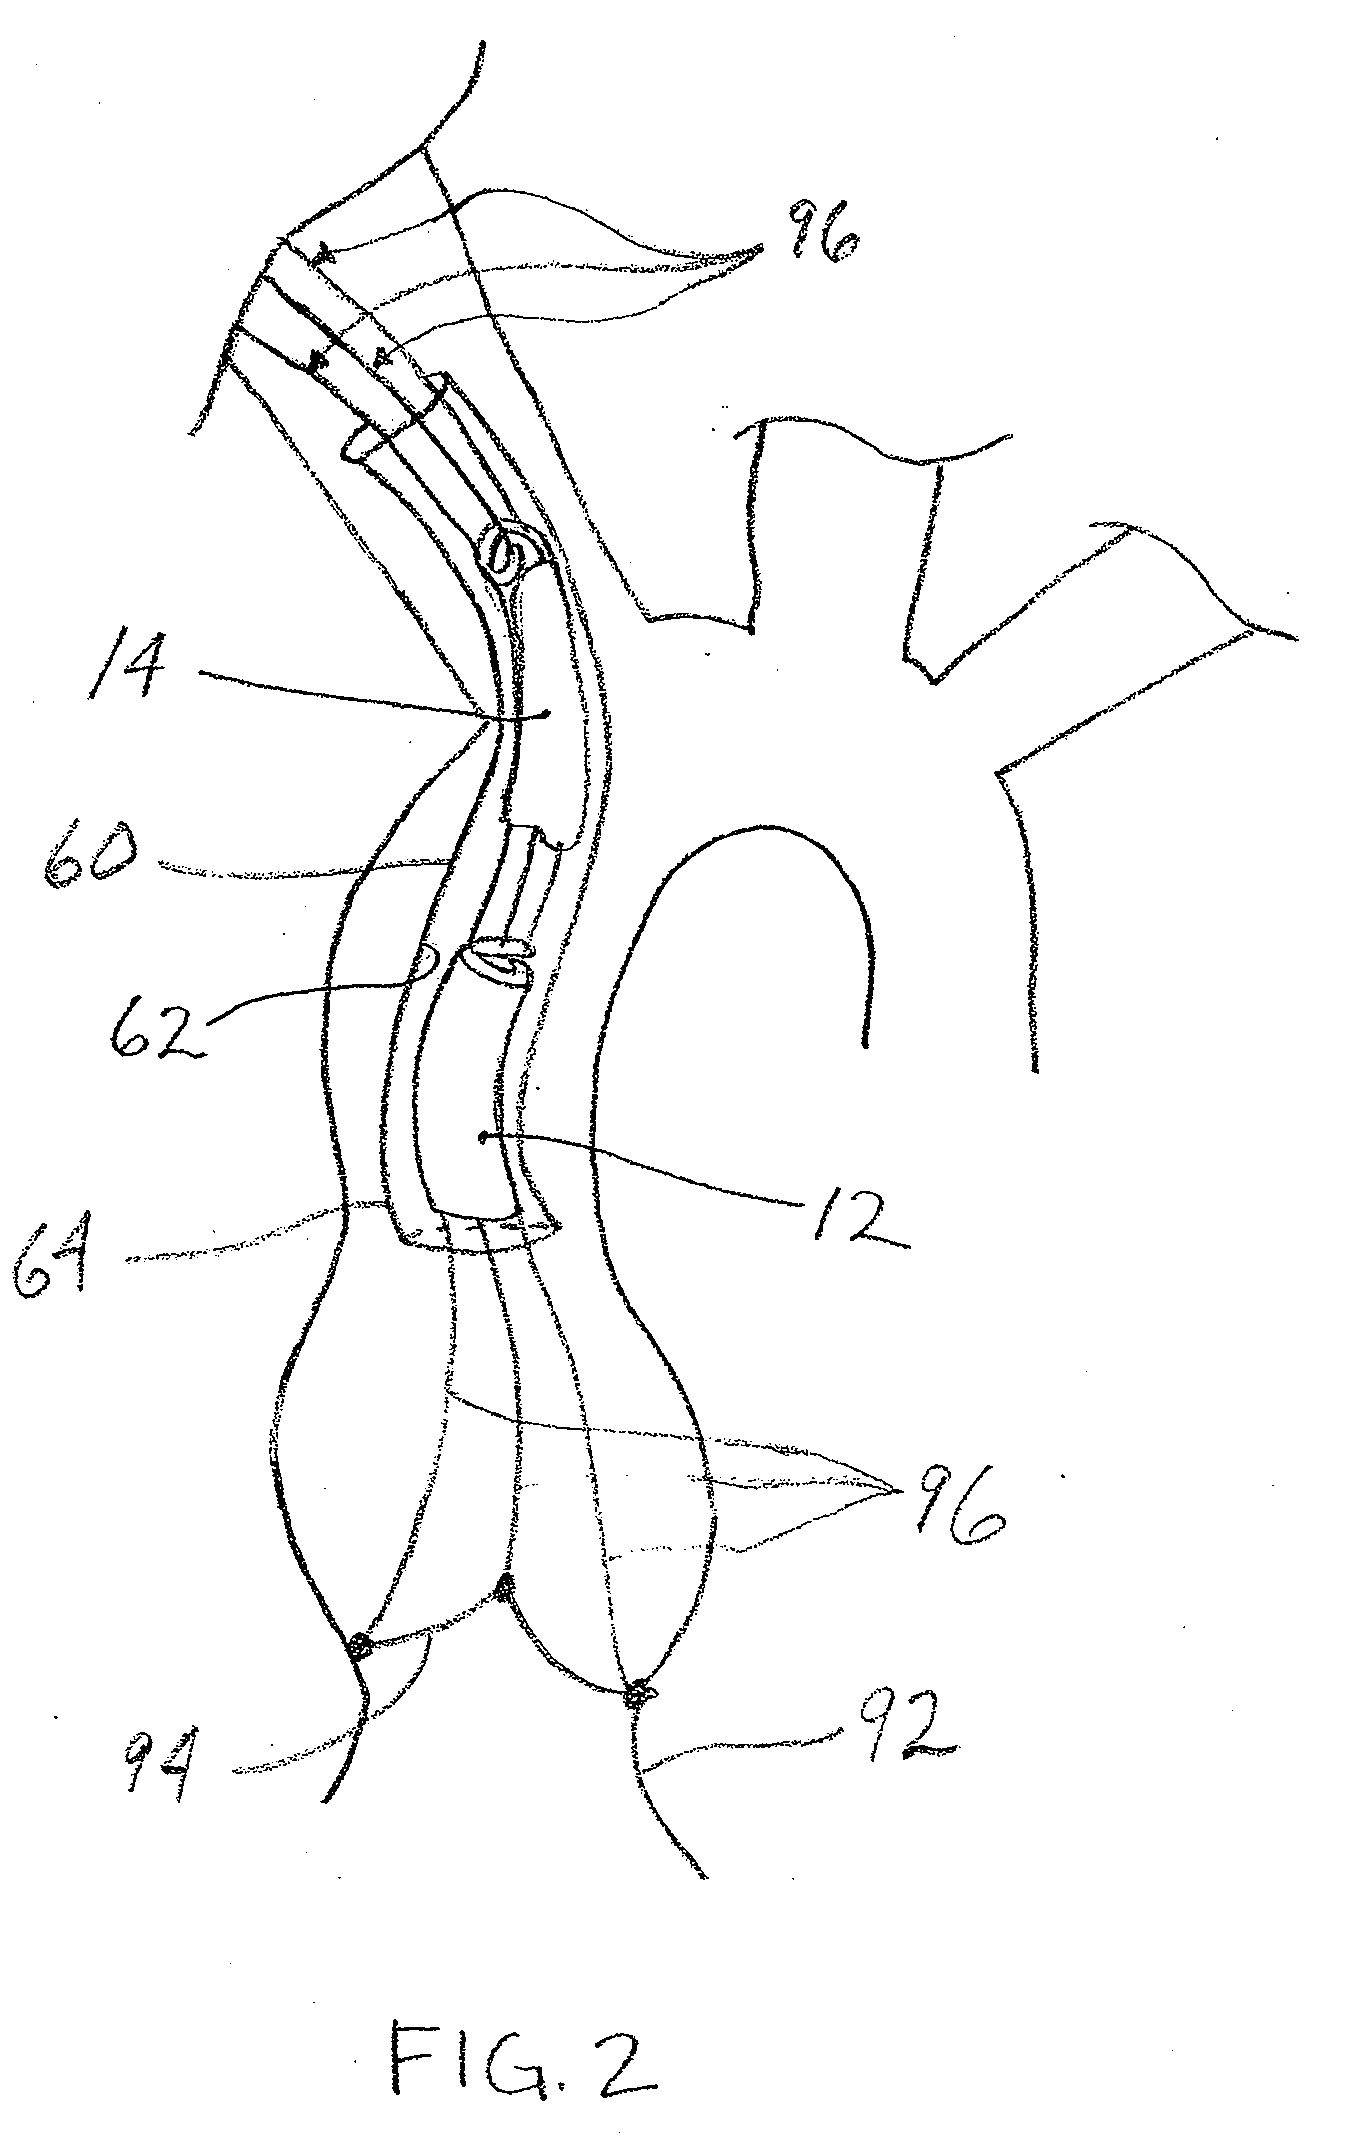 Two-piece percutaneous prosthetic heart valves and methods for making and using them